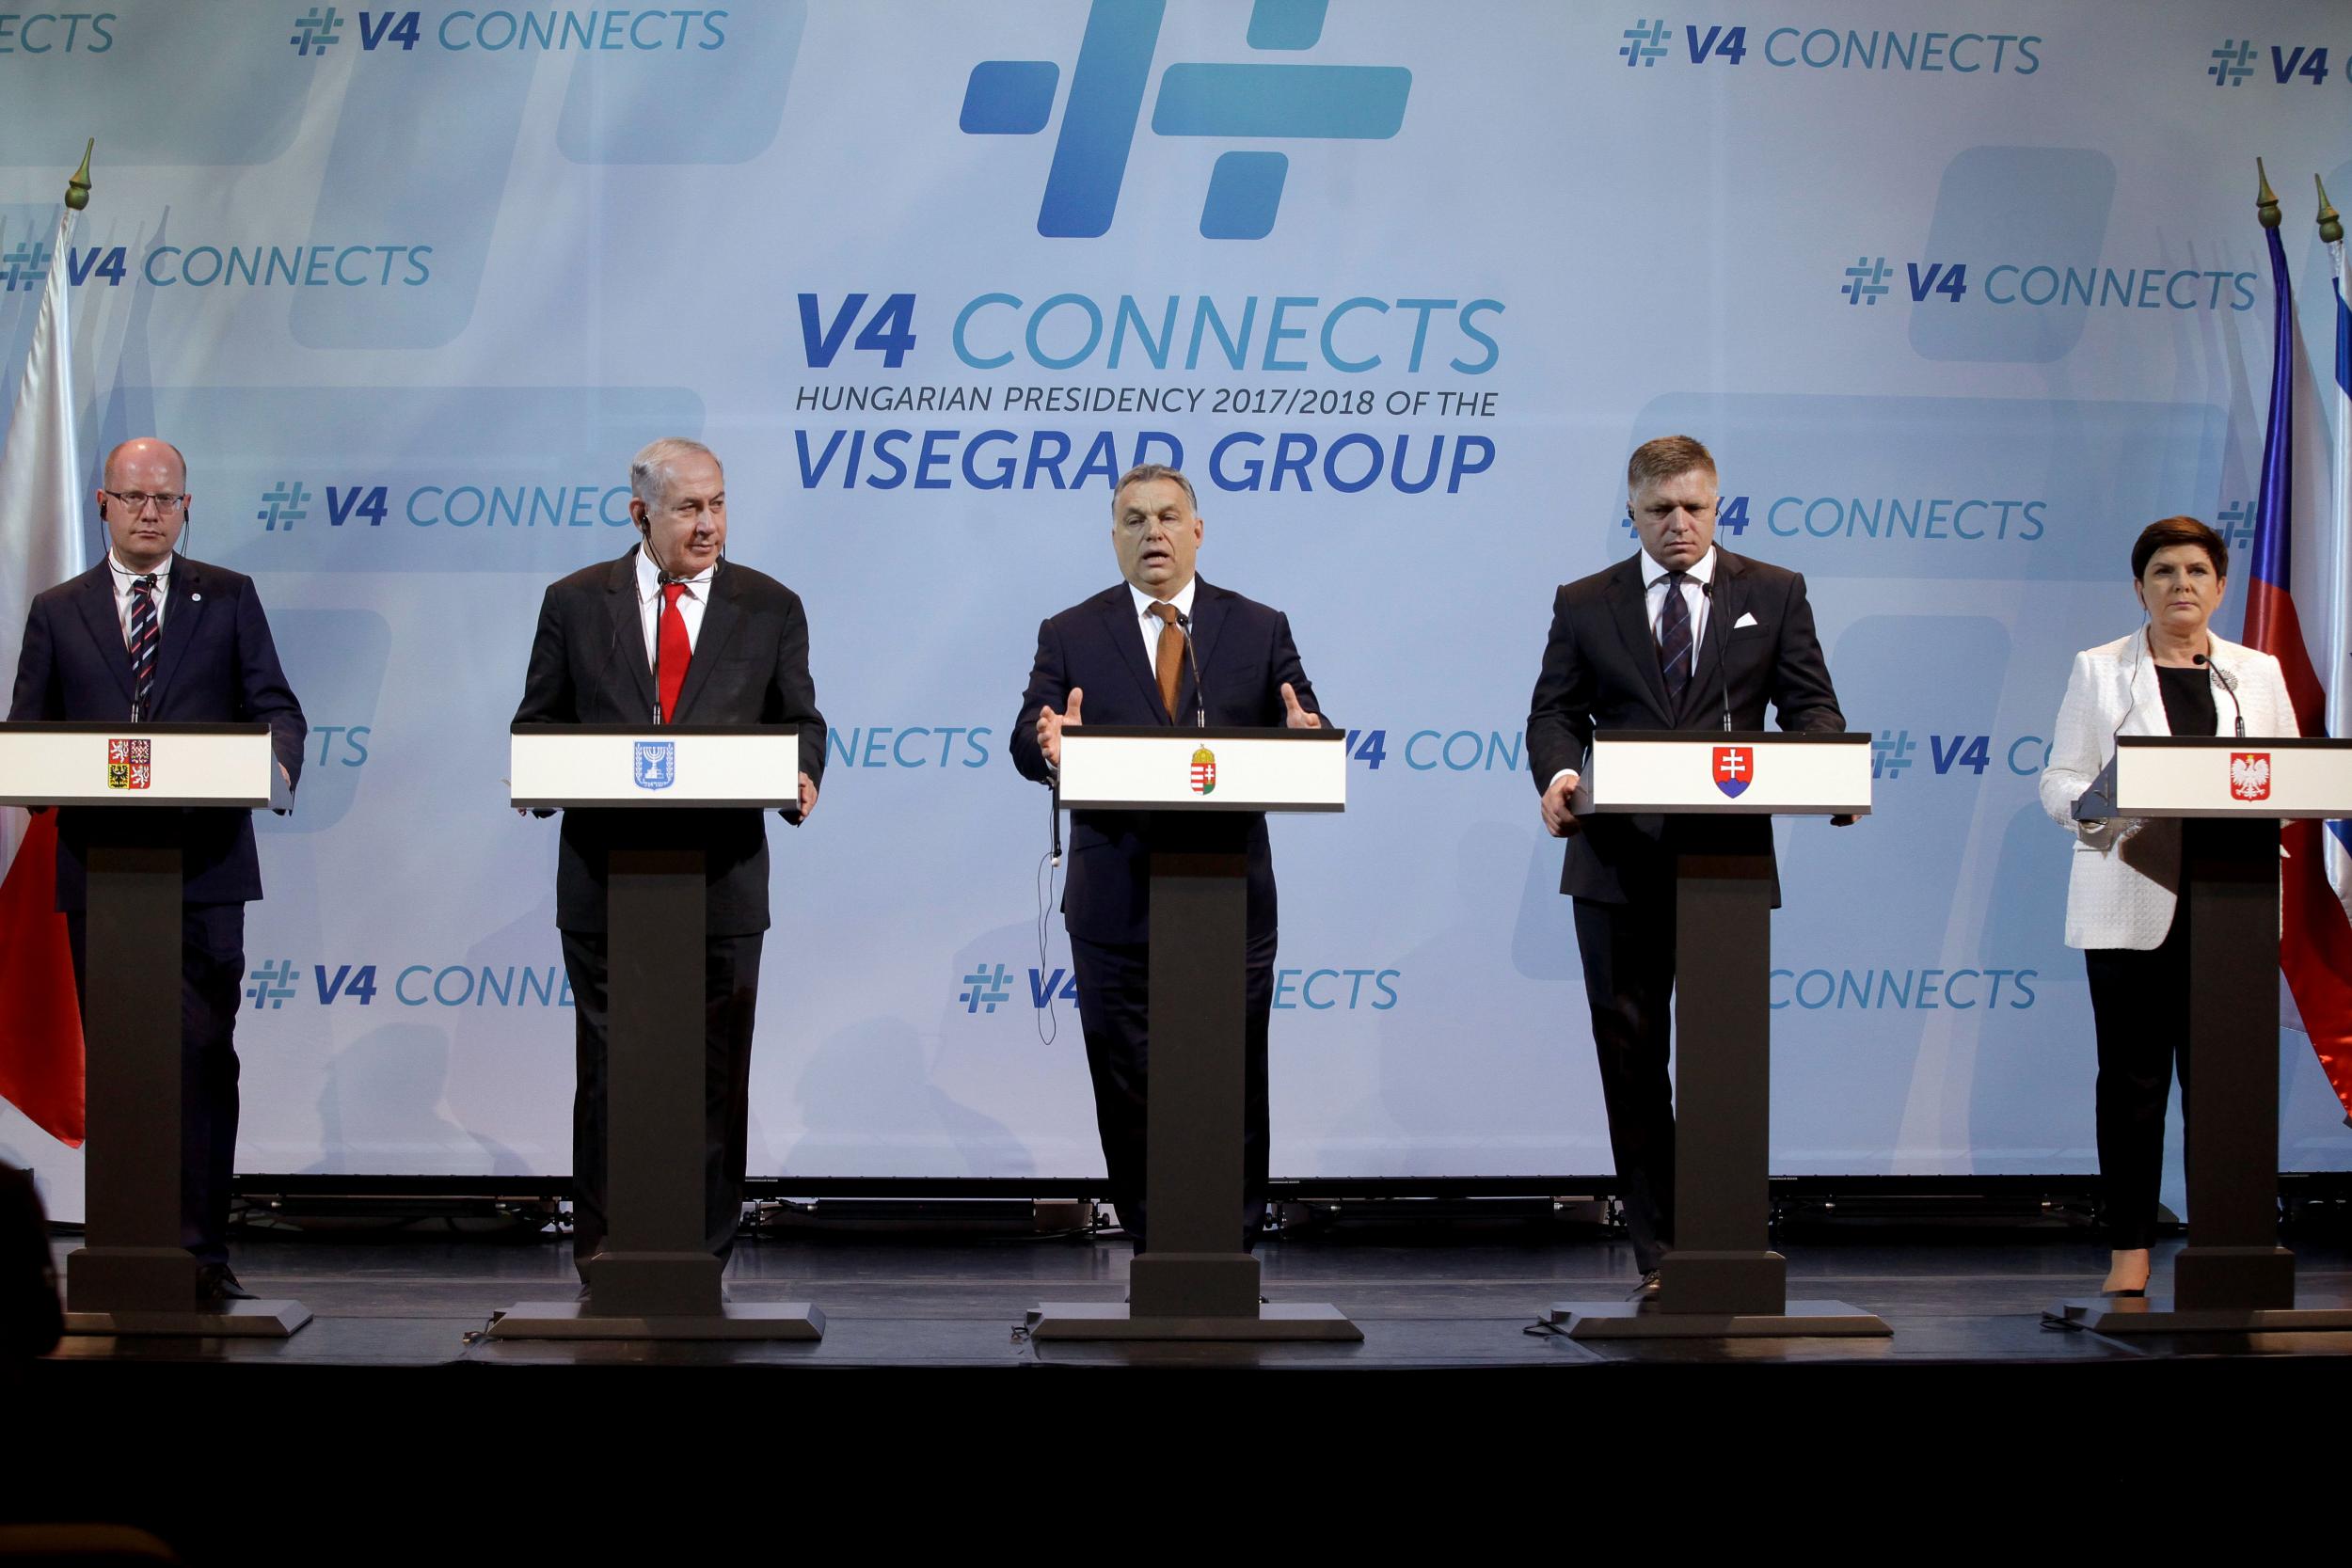 Israeli Prime Minister Benjamin Netanyahu in the main hall of Pesti Vigado cultural centre during a joint press conference of Visegrad leaders in Budapest 2017